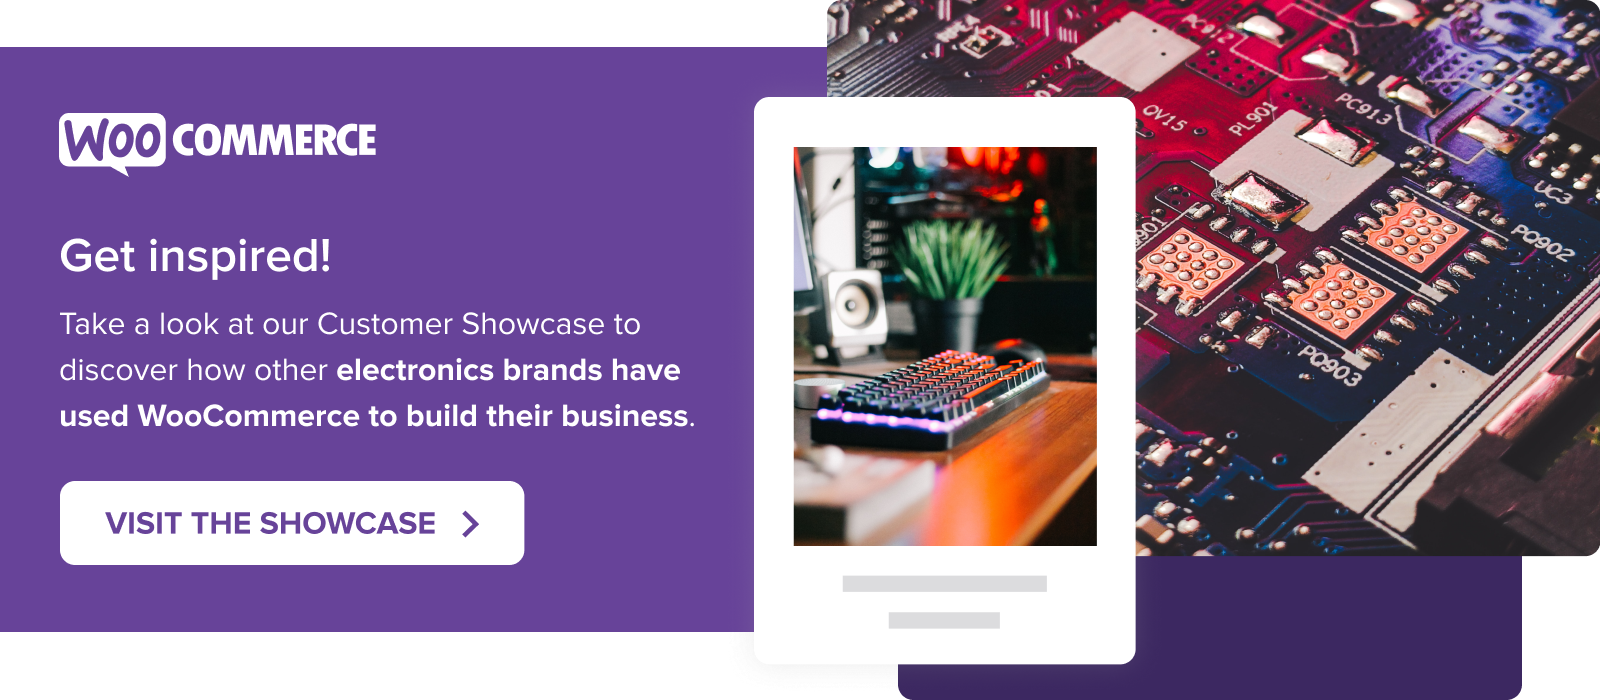 Visit the Customer Showcase to find out how other electronics brands have used WooCommerce